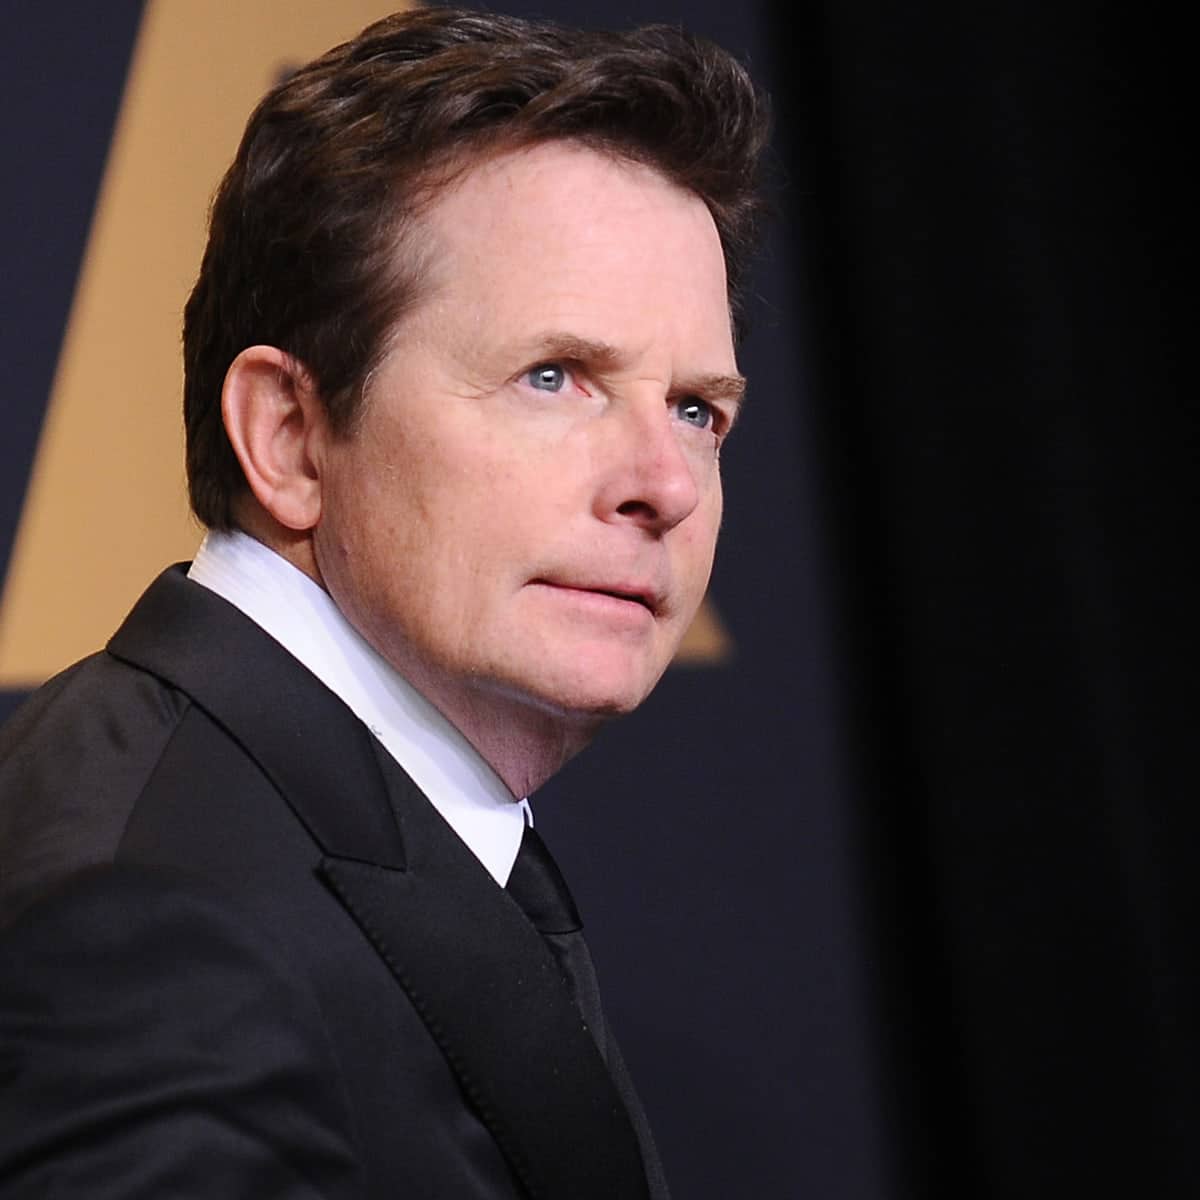 Daughter Michael J Fox Kids : Michael J Fox And Wife Reveal Plans Now ...